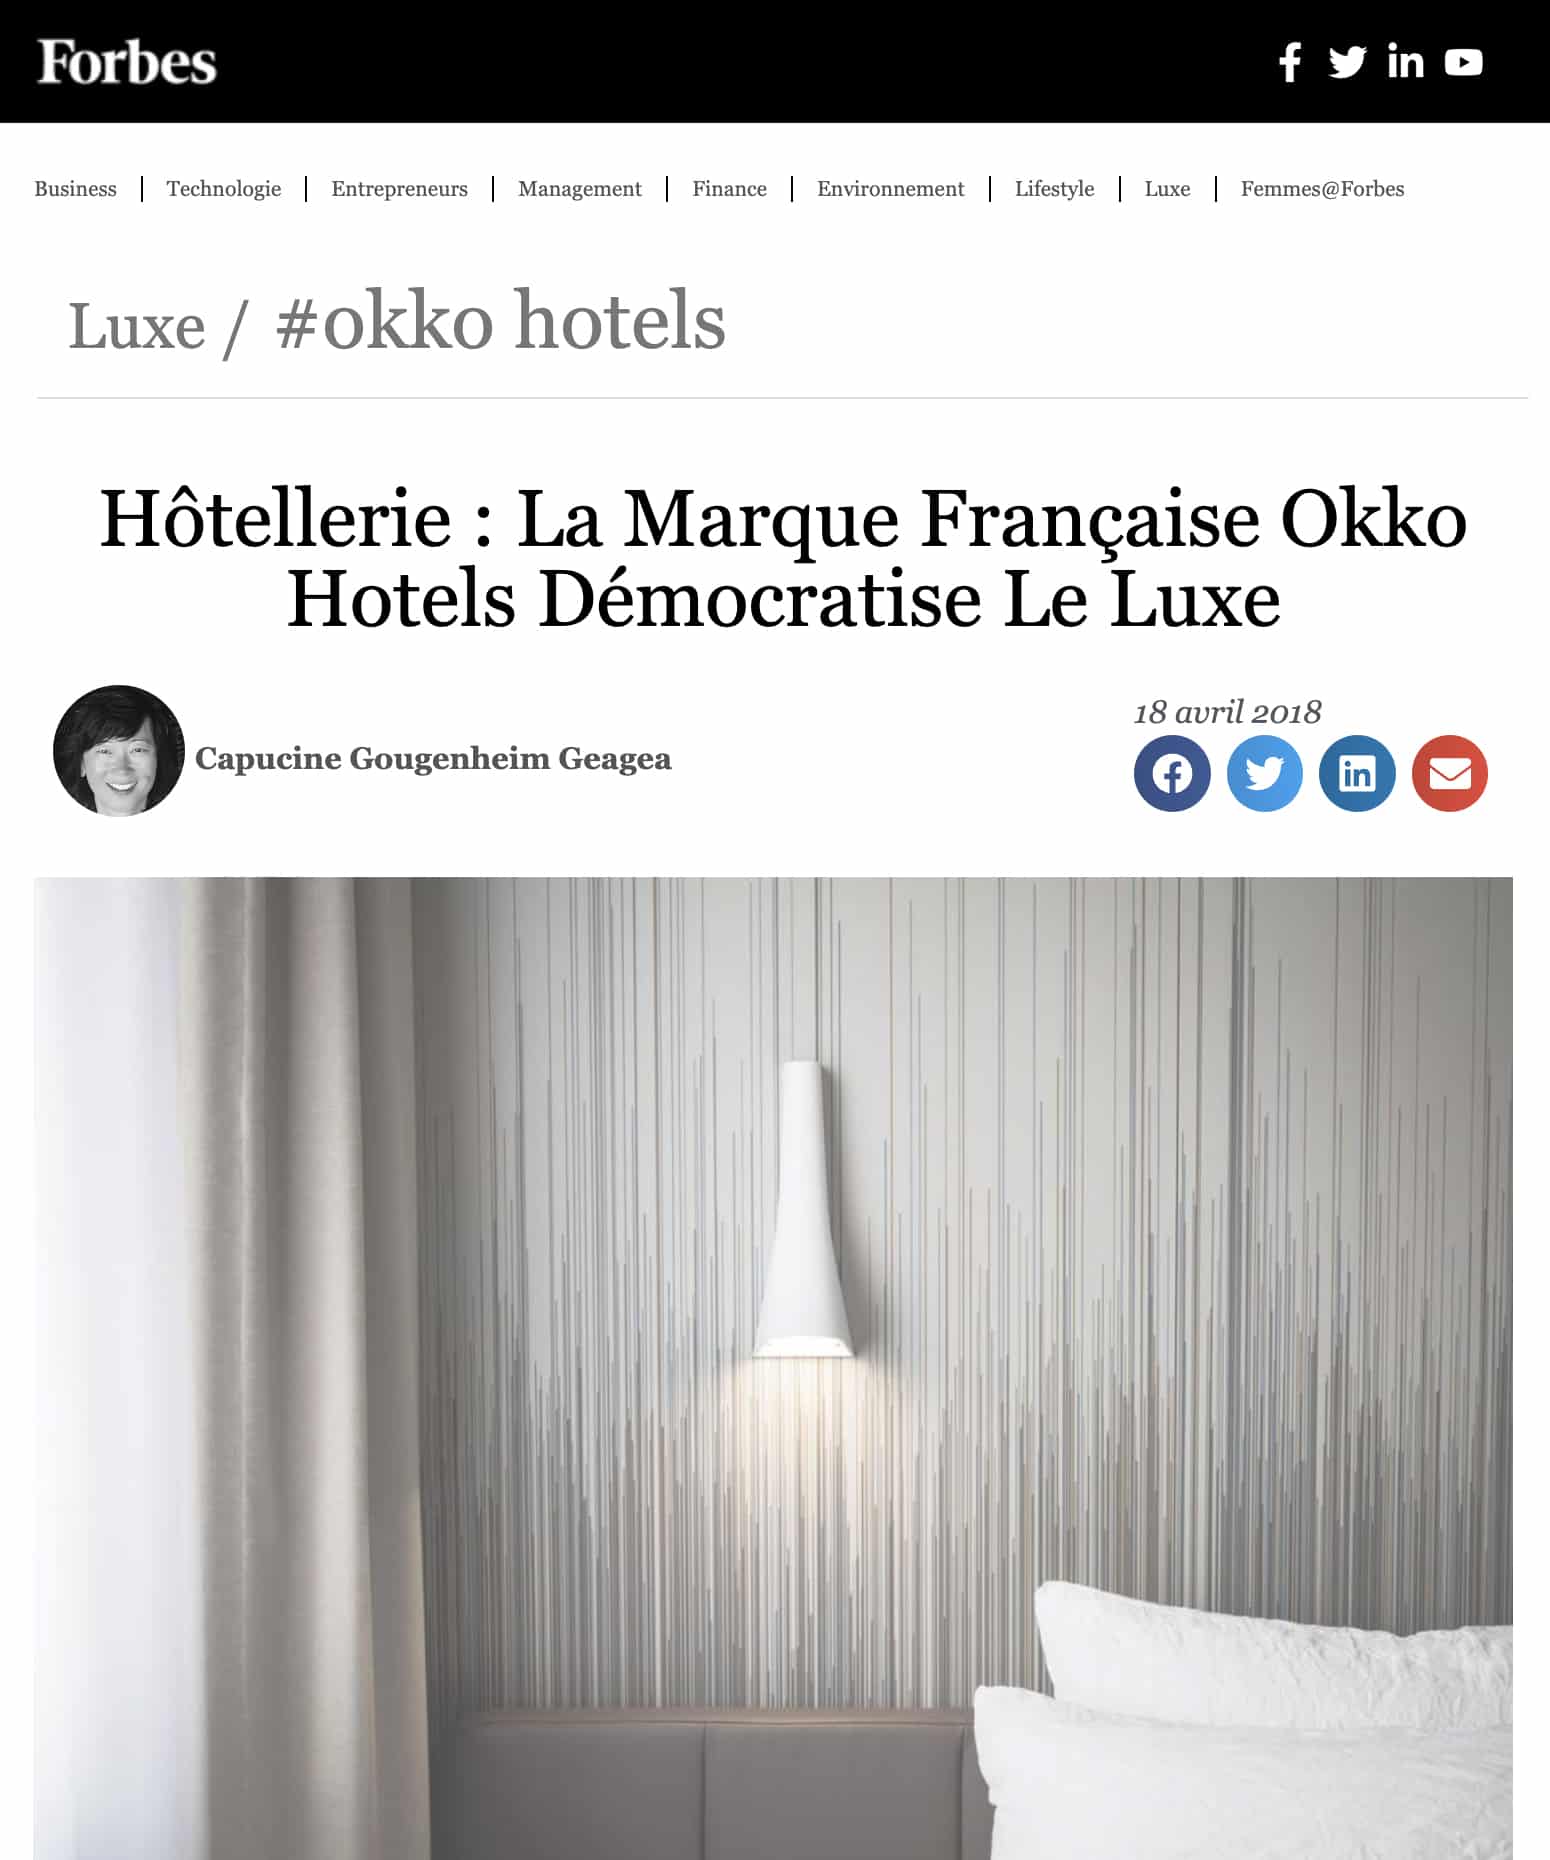 Forbes Hotellerie La Marque Francaise Okko Hotels Democratise Le Luxe